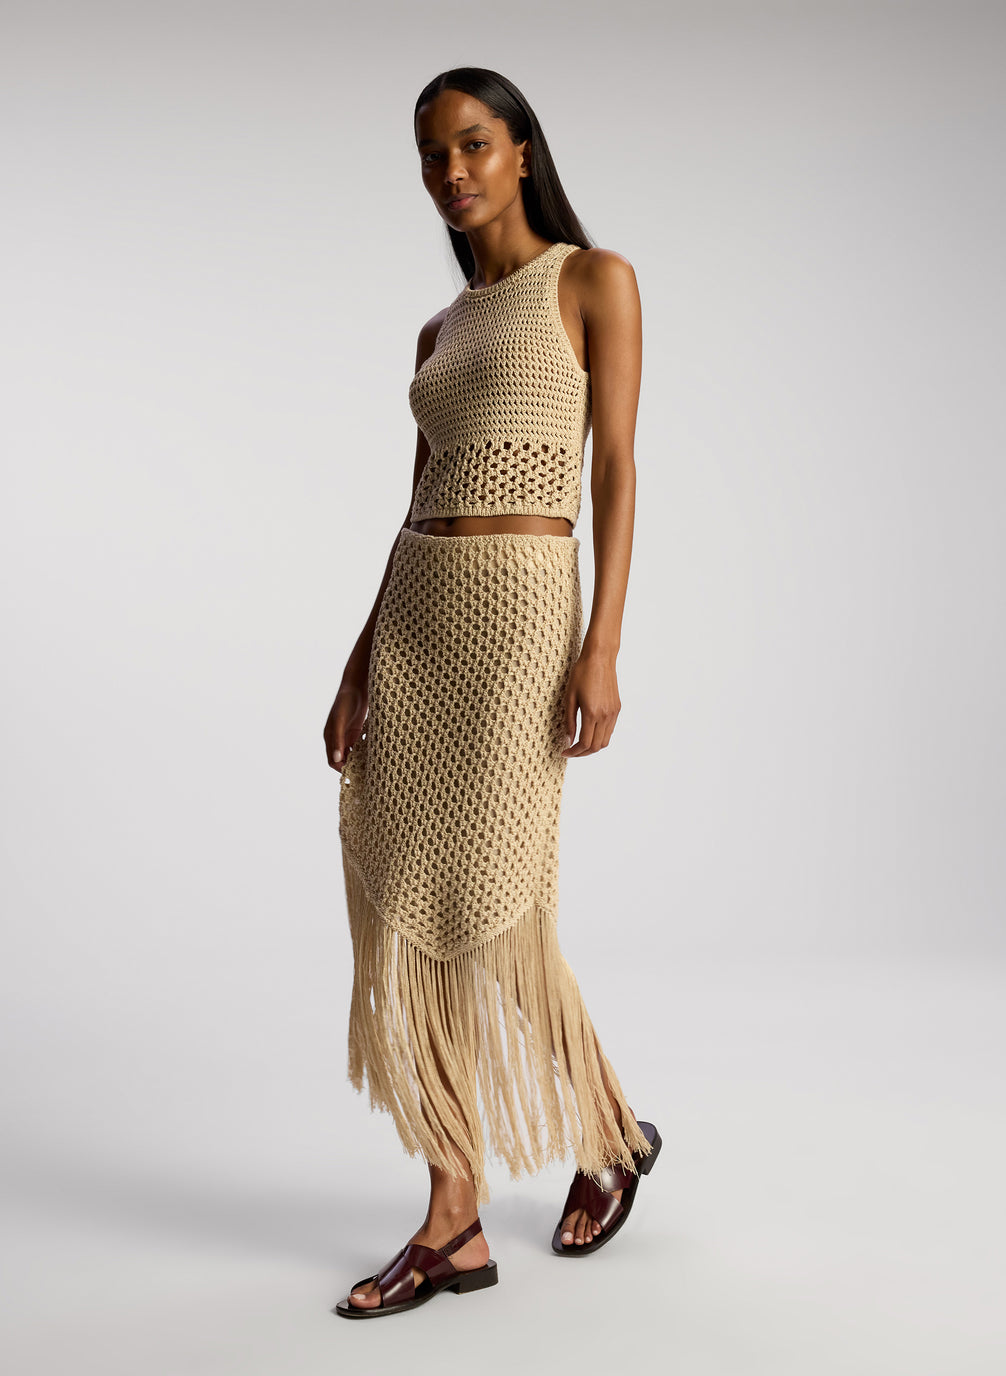 side  view of woman wearing tan crochet top and skirt set